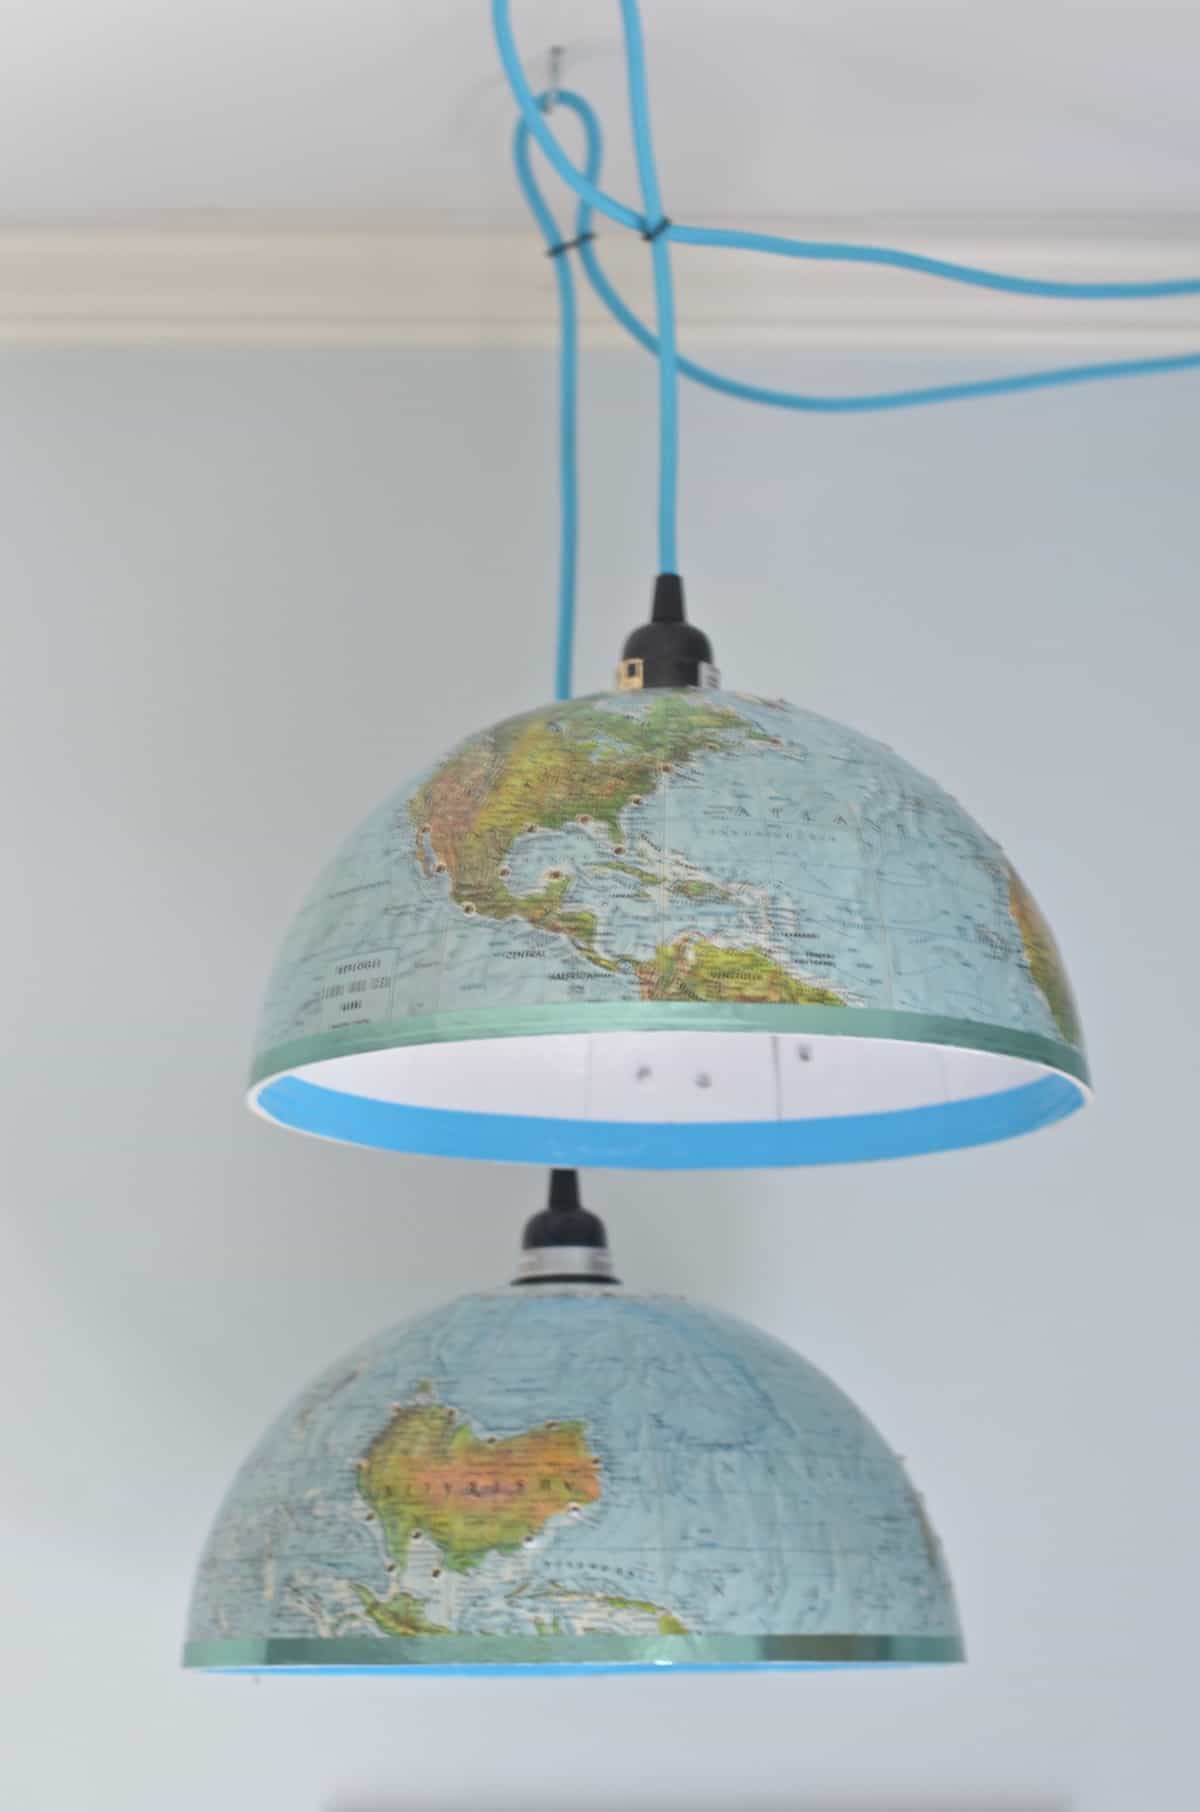 How to turn a thrifted globe into a pair of fun hanging pendant lights.